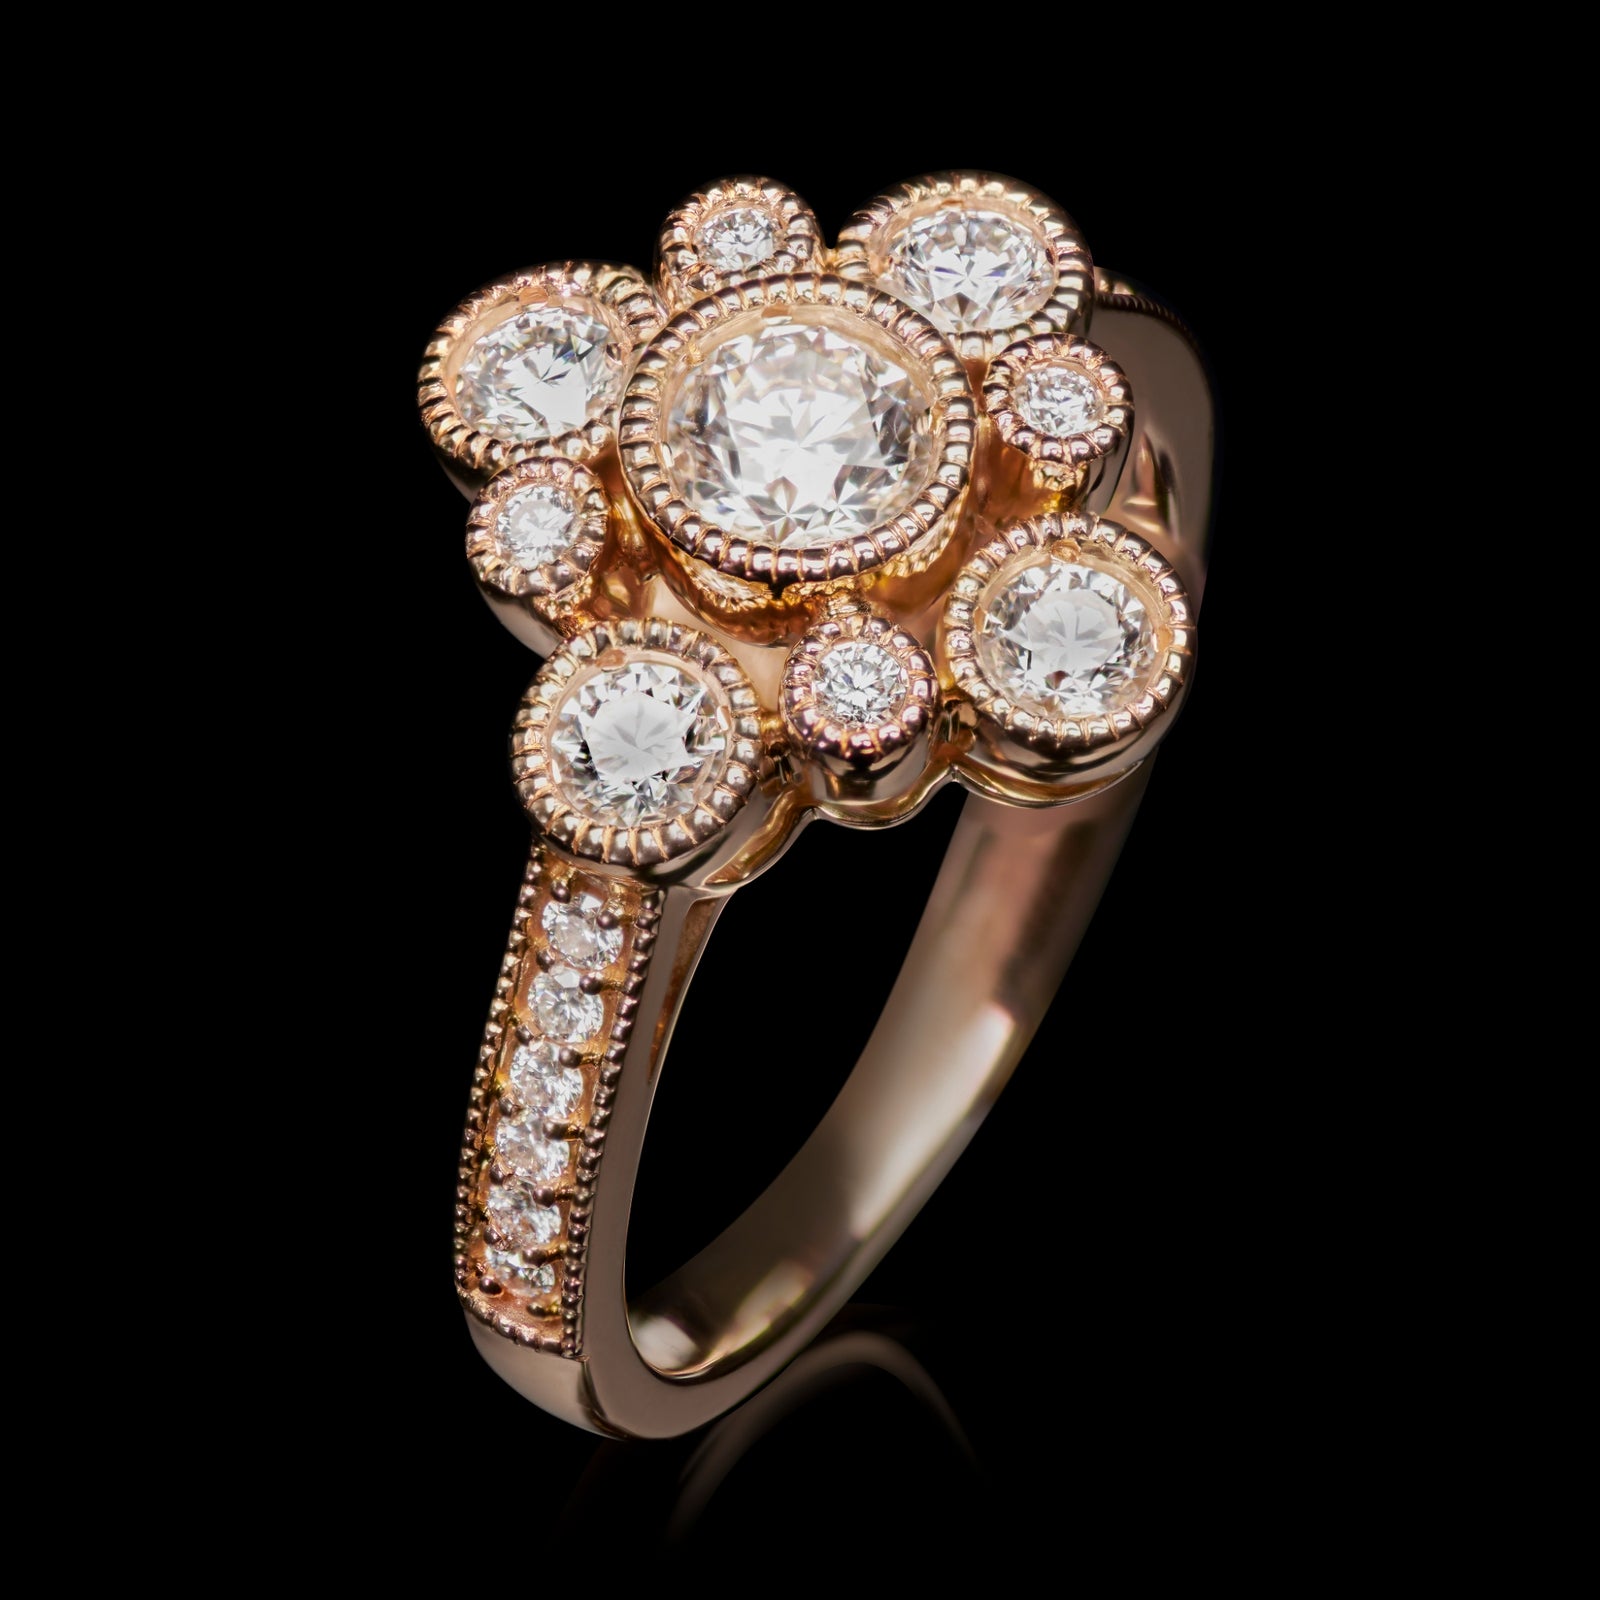 A Beautiful & Unusual Cruciform Diamond Cluster Ring, influenced by Tudor Ring Design